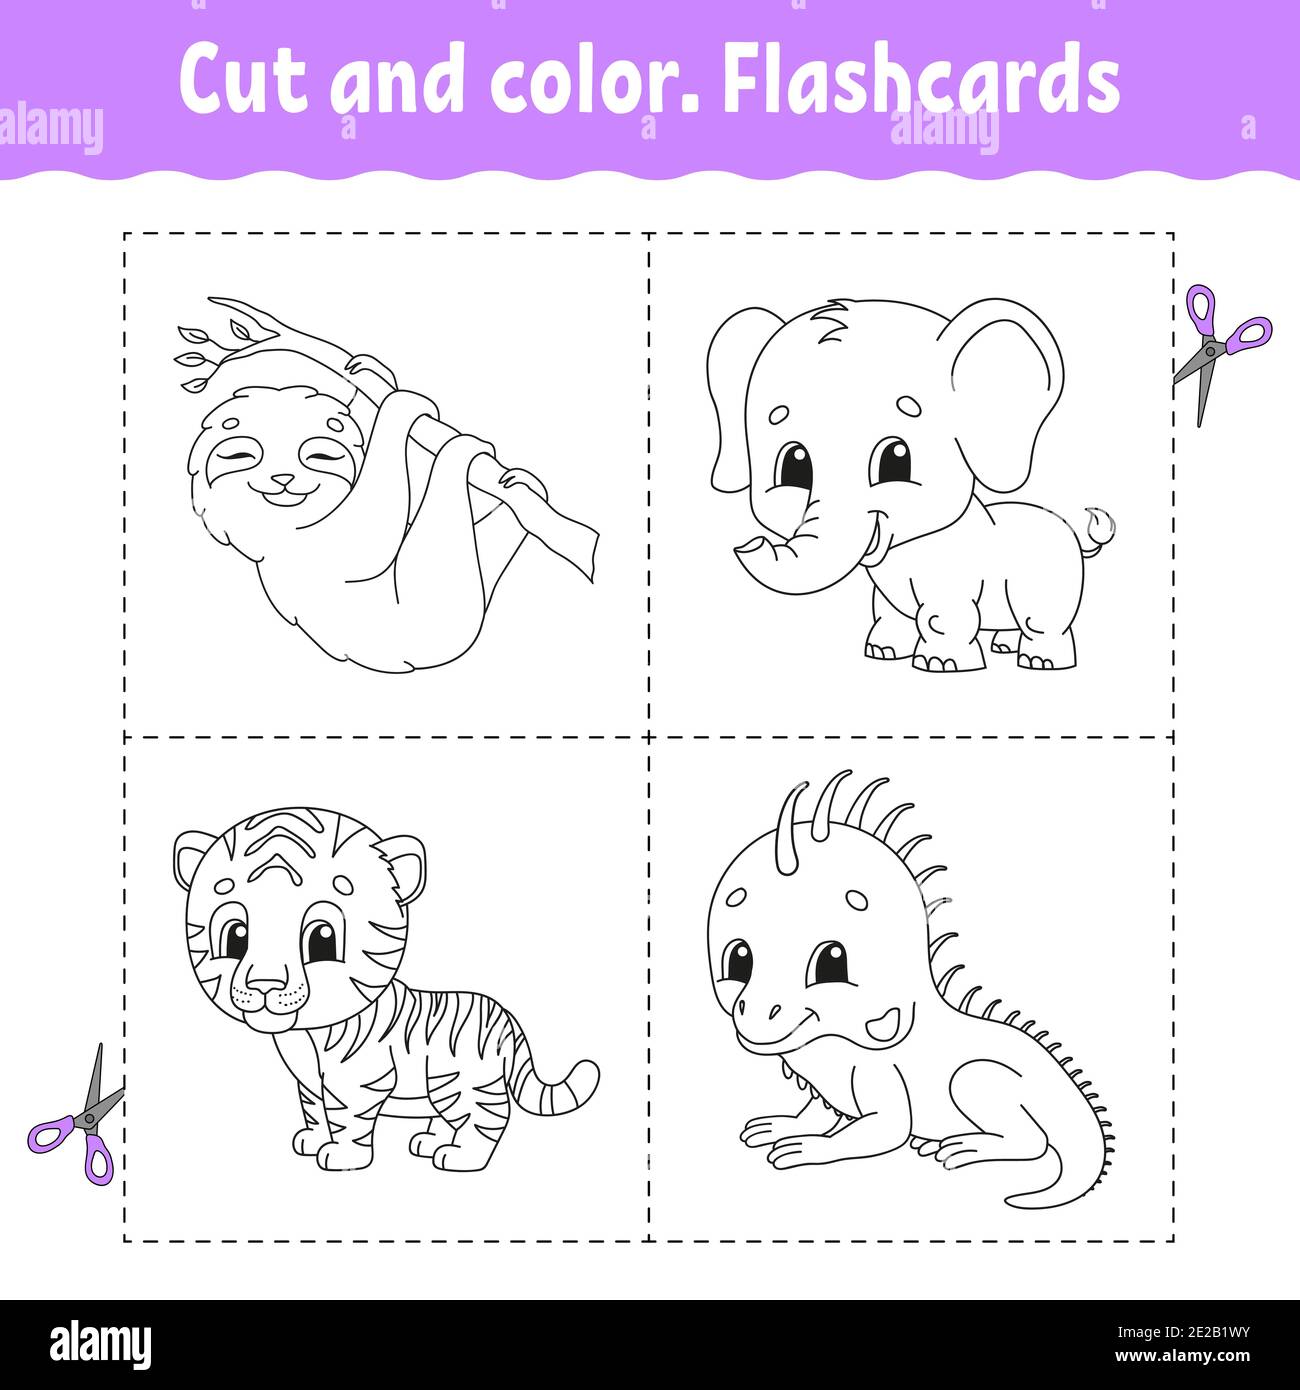 Cut and color. Flashcard Set. tiger, sloth, iguana, elephant. Coloring book for kids. Cartoon character. Cute animal. Stock Vector